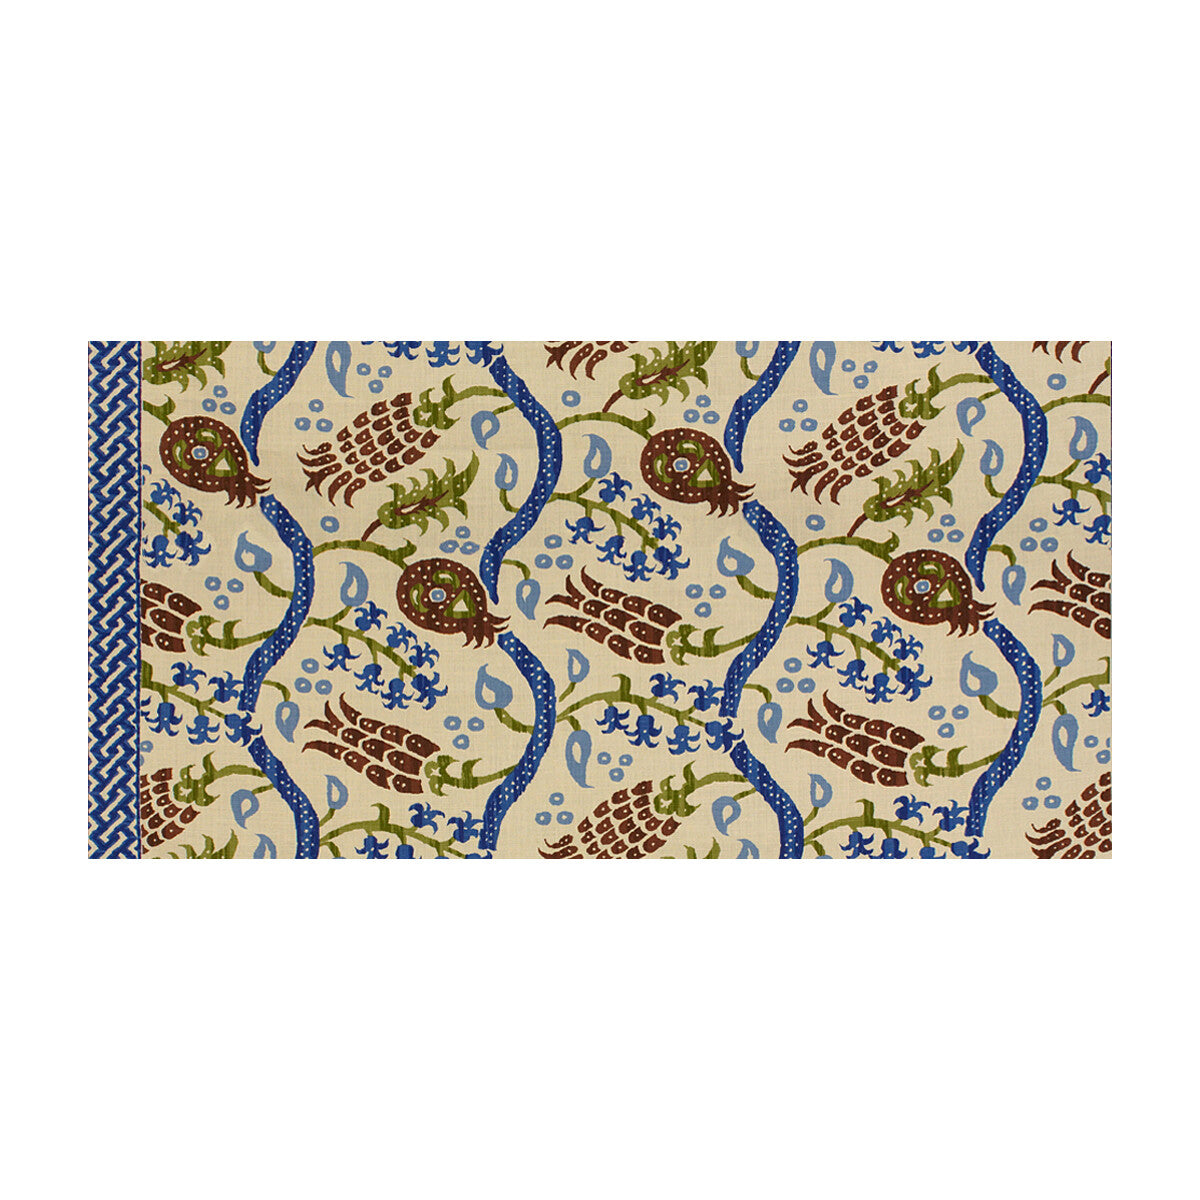 Nisiotiko Linen Print fabric in nutmeg/canton blue color - pattern BR-700019.832.0 - by Brunschwig &amp; Fils in the Les Alizes collection